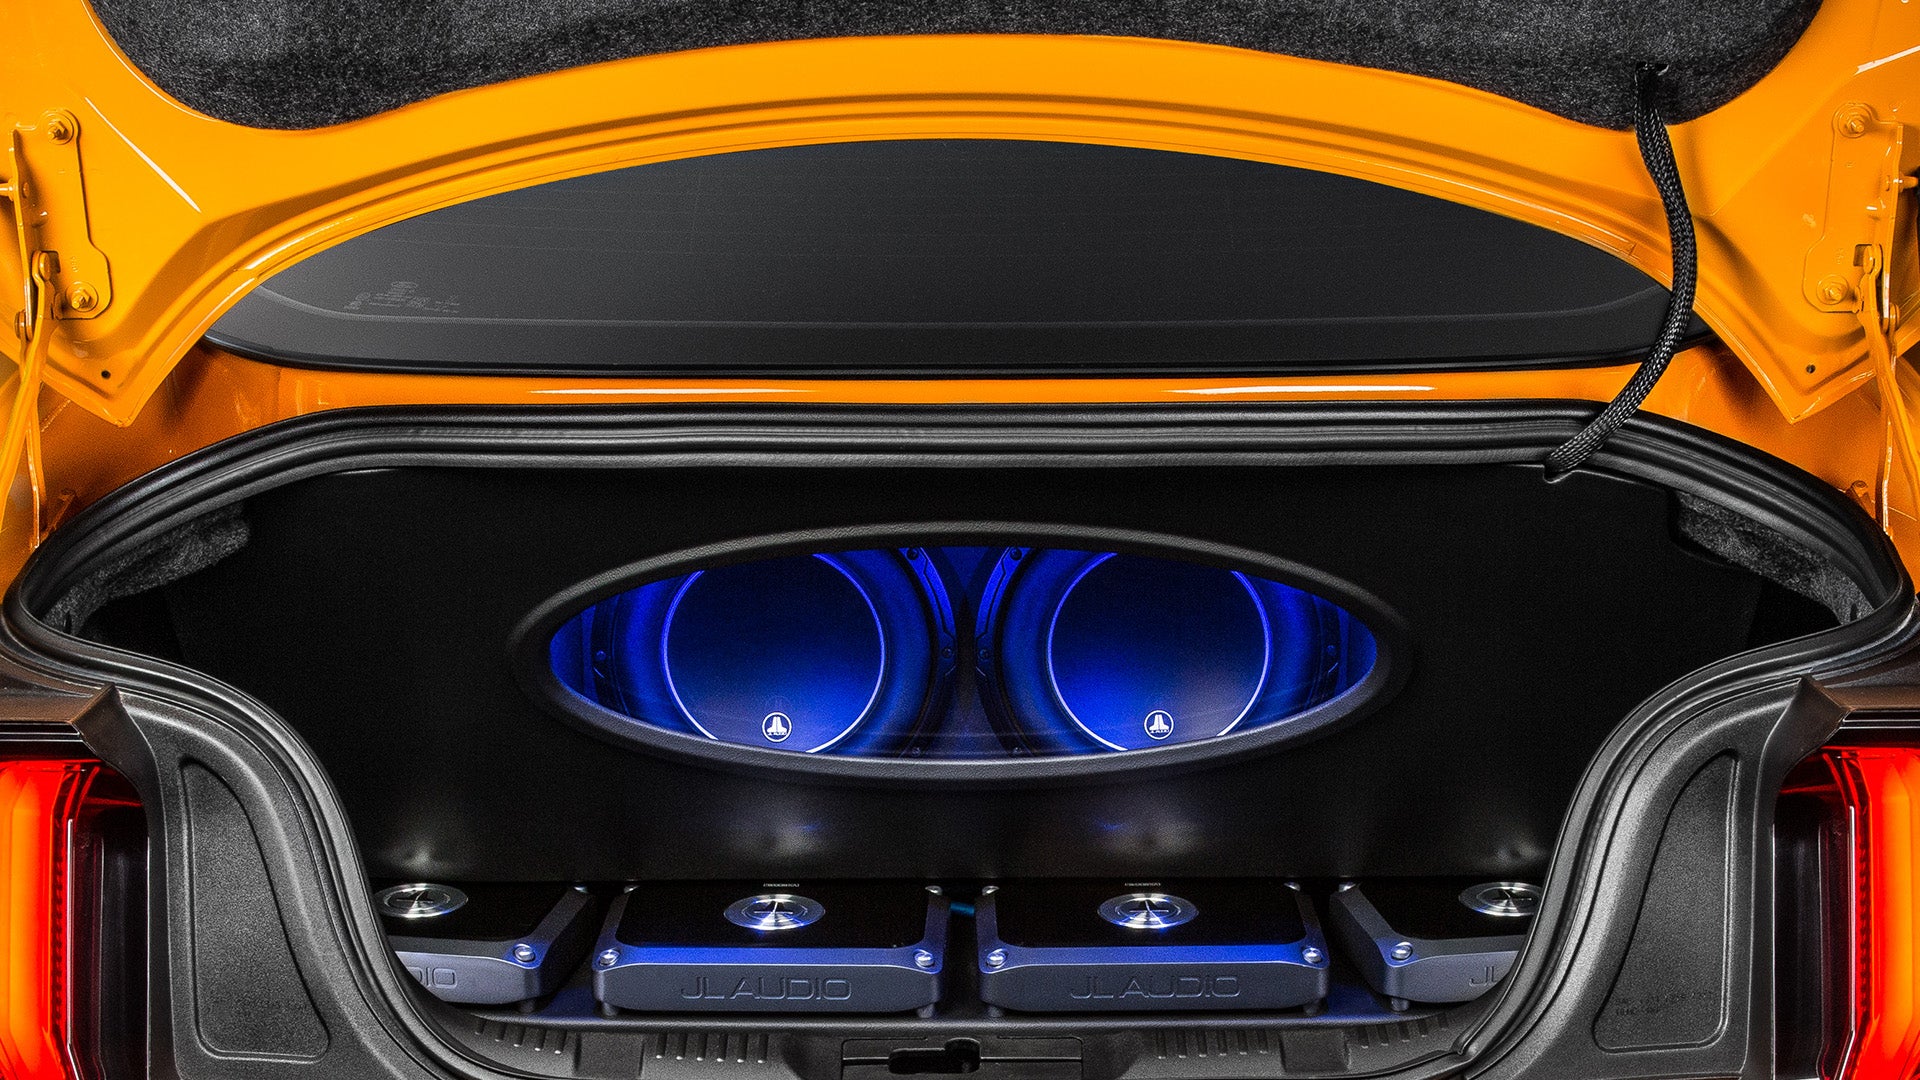 A trunk of a Mustang car with a pair of installed W6v3 car audio subwoofer units.